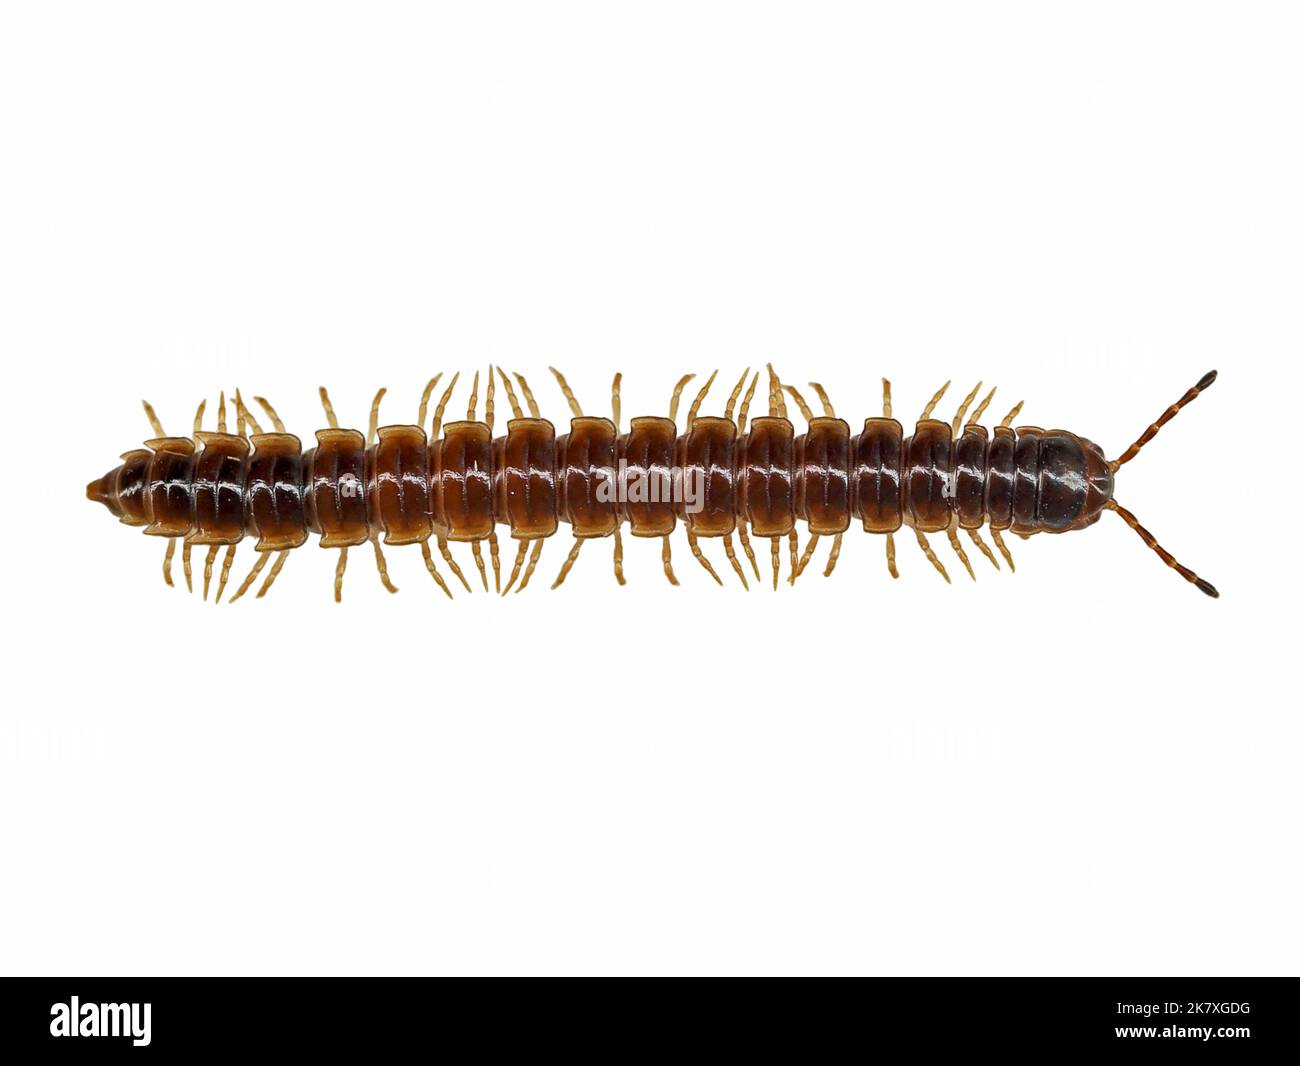 top view of a greenhouse millipede, Oxidus gracilis, isolated on white background Stock Photo